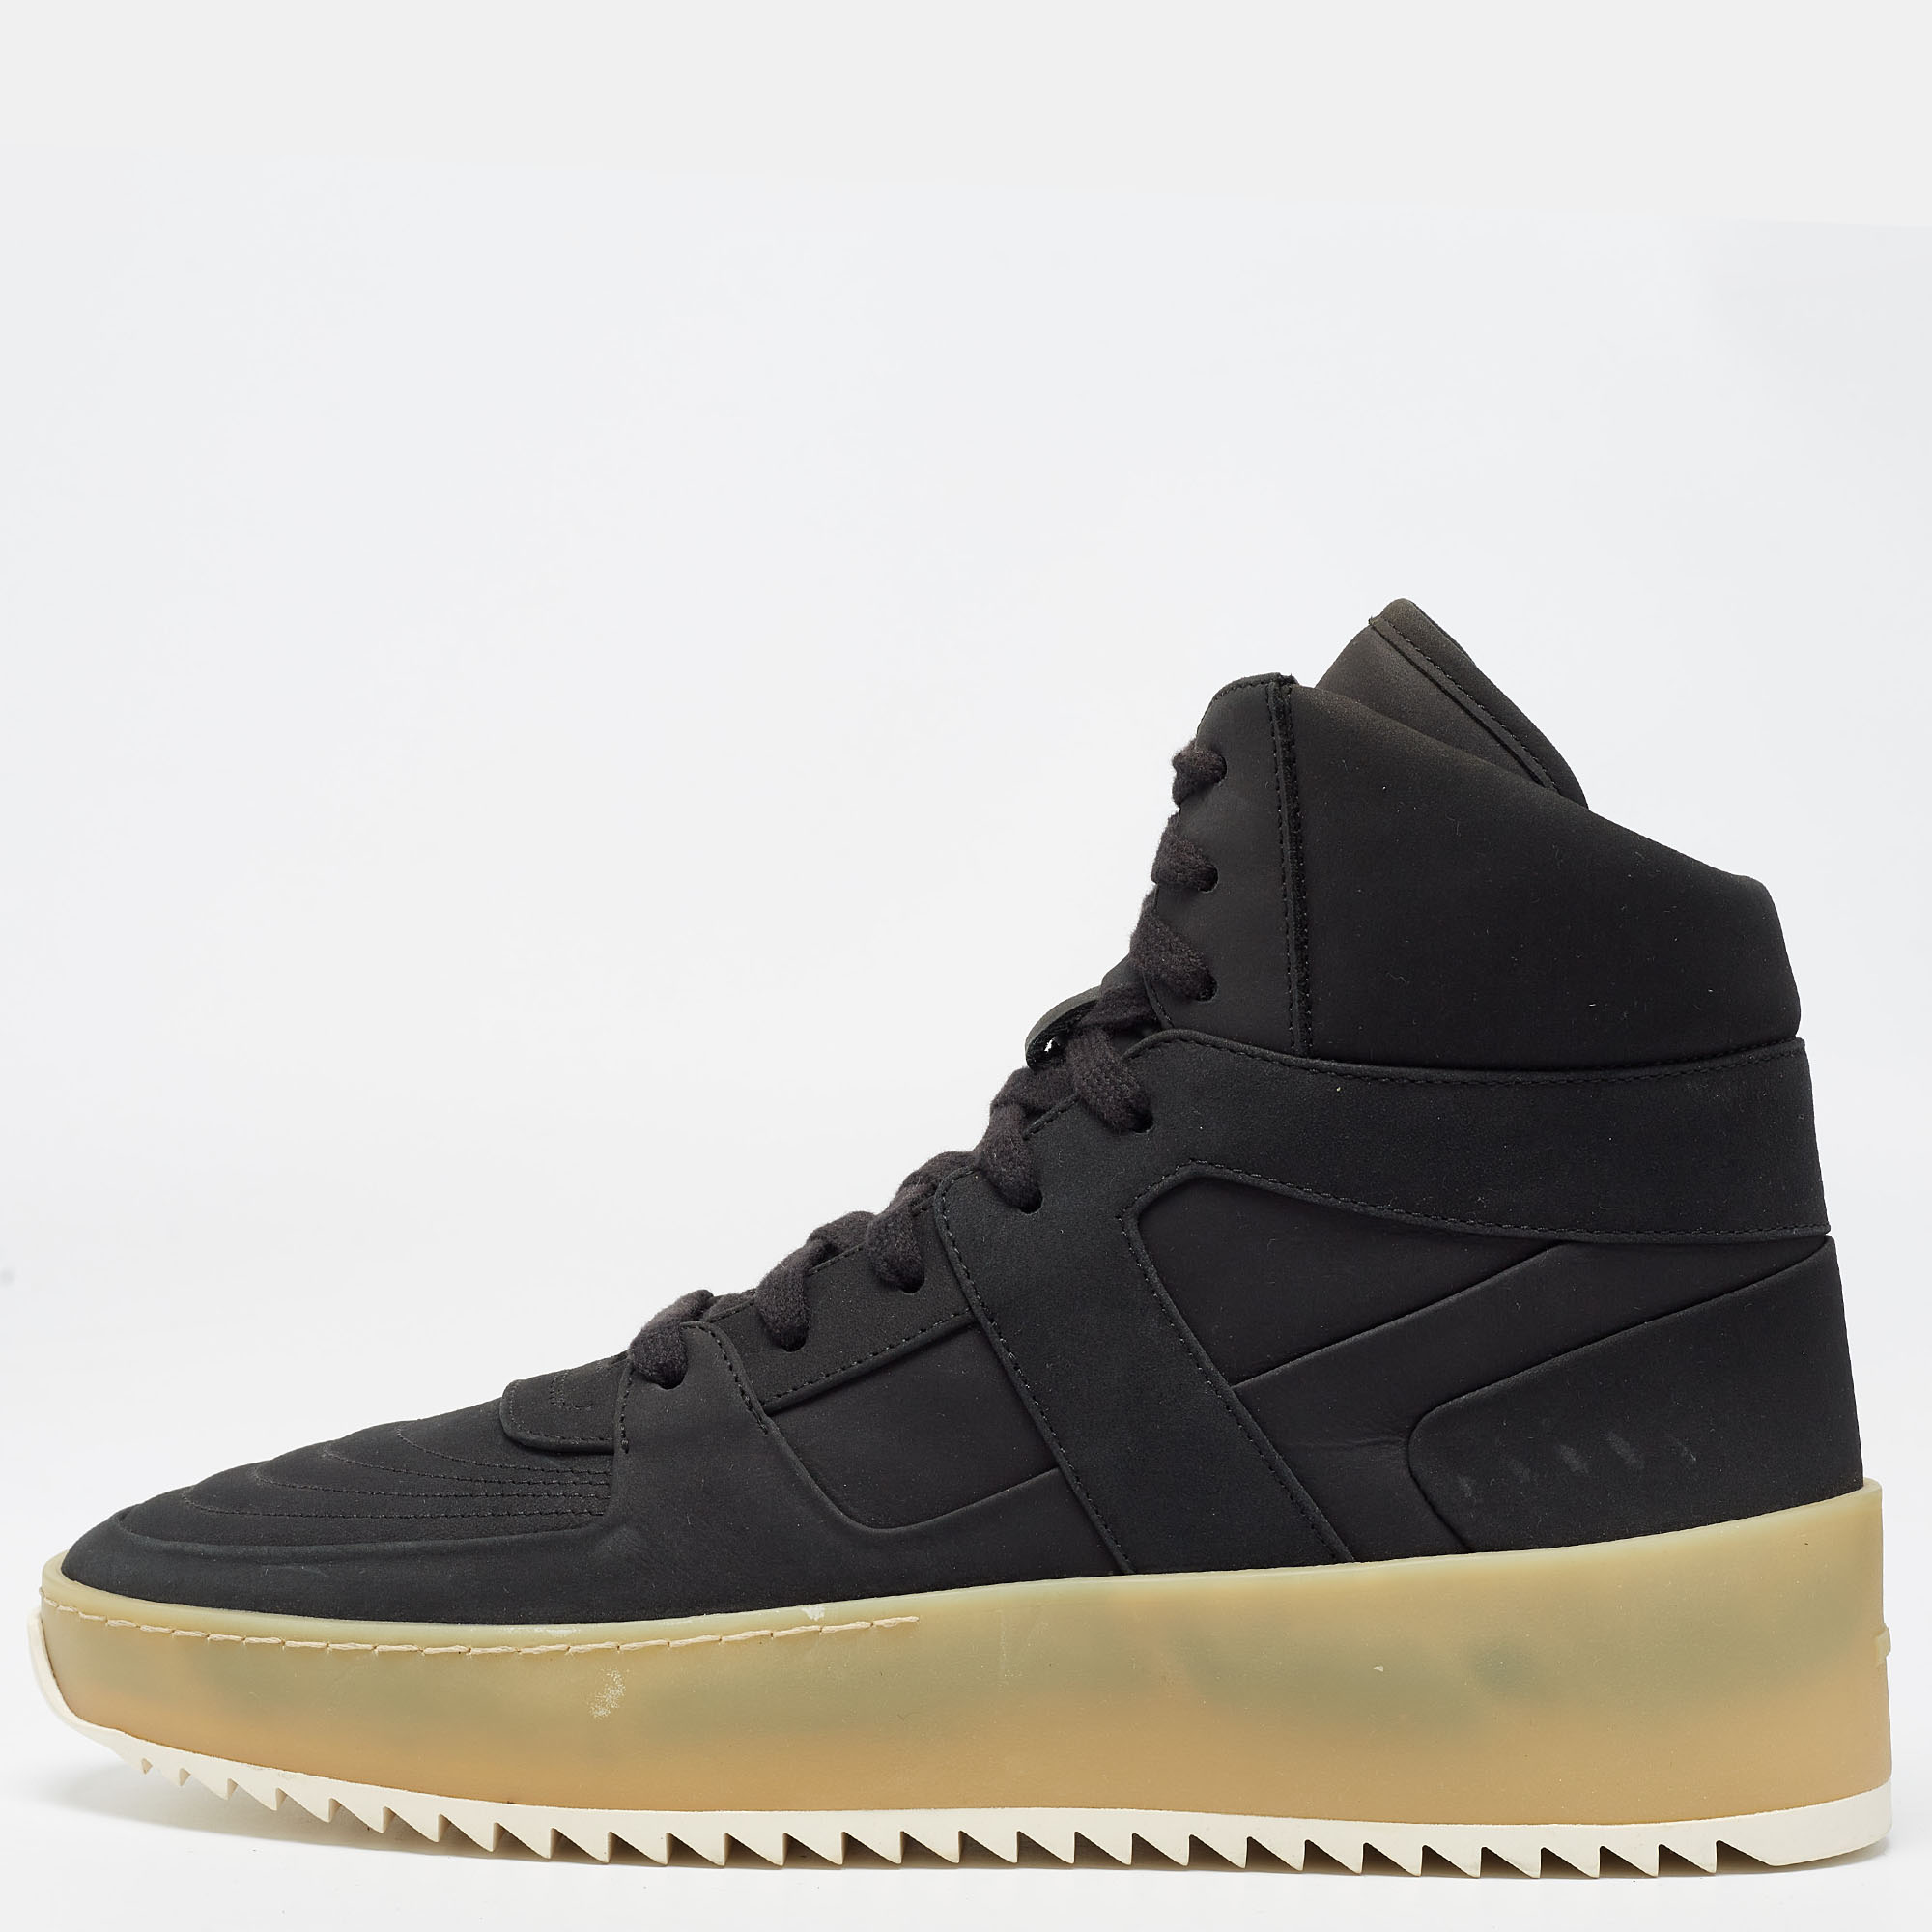 

Fear of God Black Nubuck High Top Sneakers Size